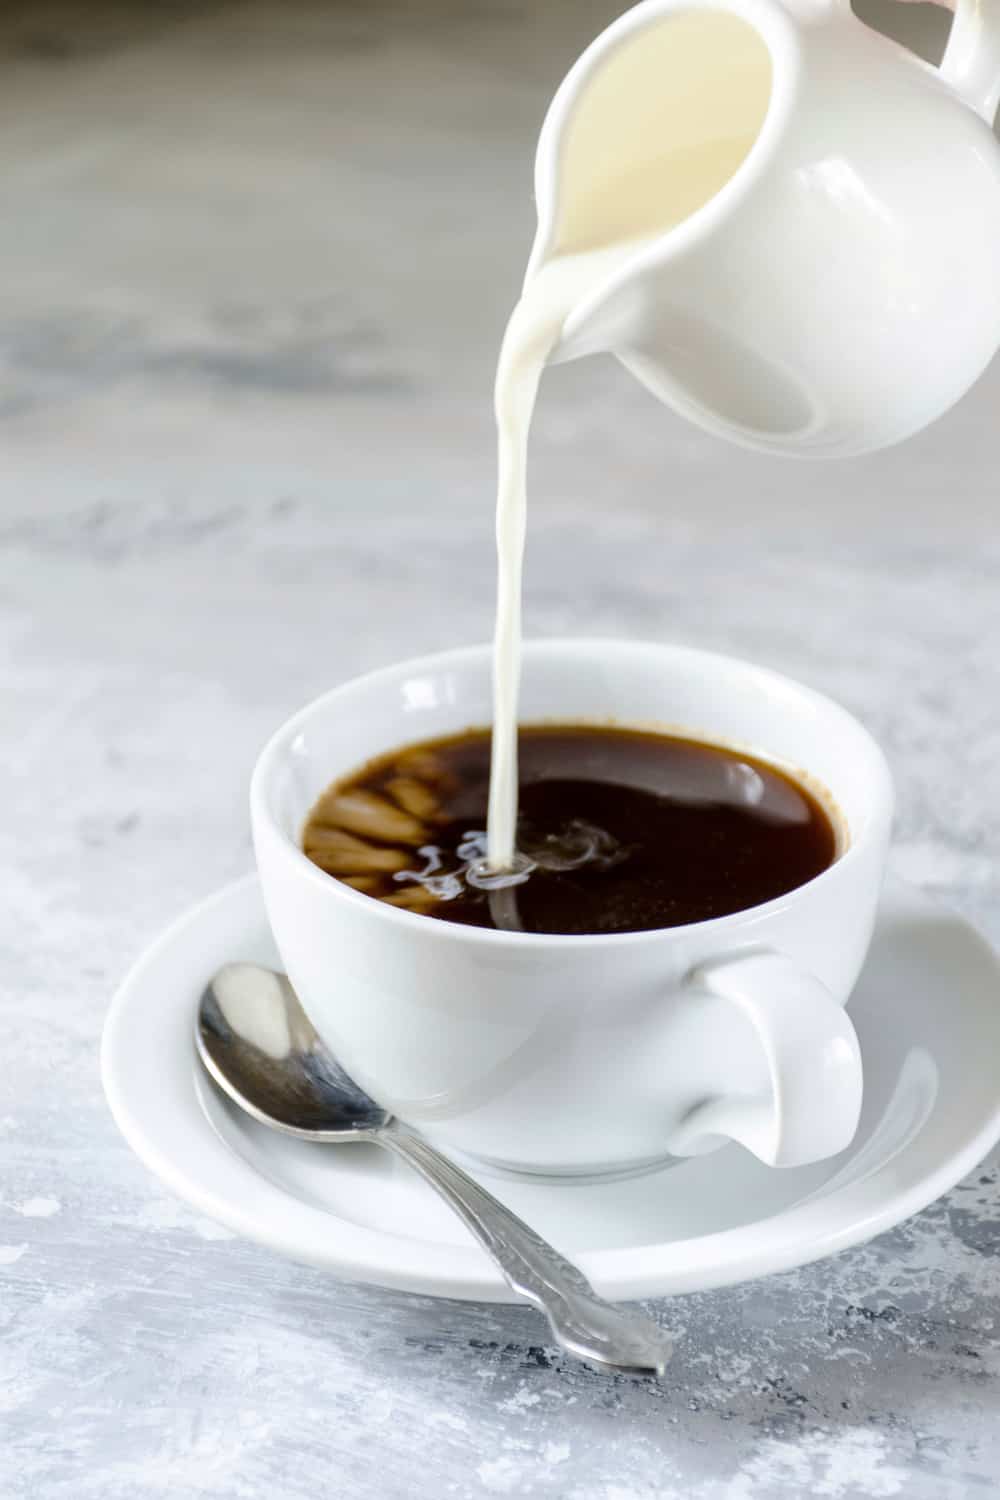 How Long Does Coffee Creamer Last? (Tips to Store for Long ...